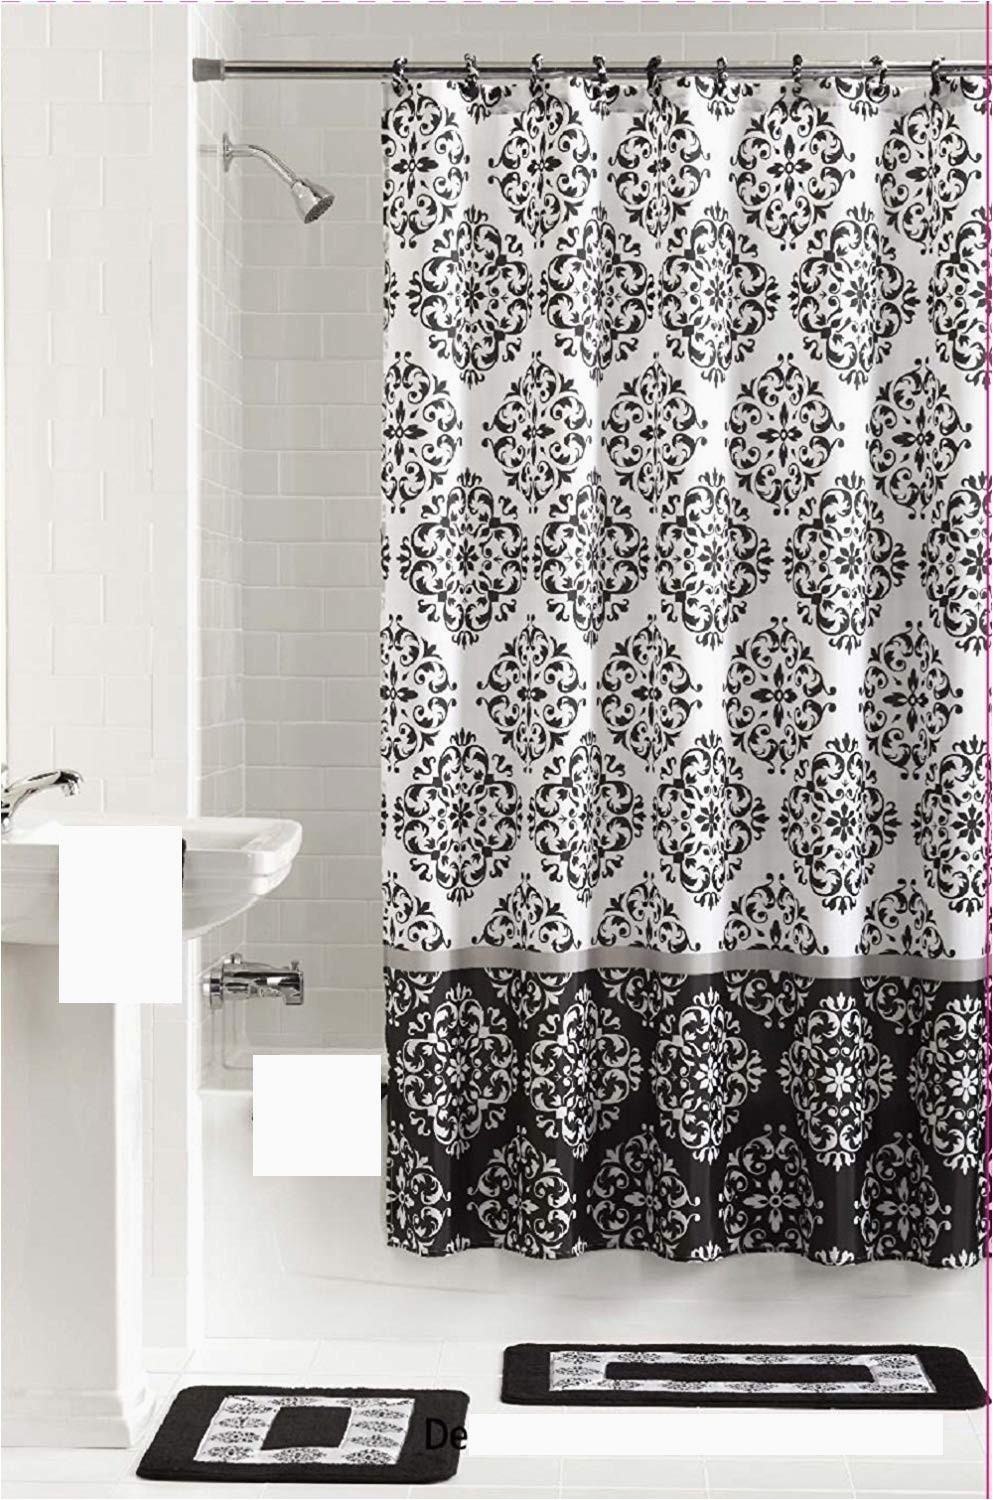 Shower Curtains with Matching Bath Rugs 15 Piece Bath Set 2 Black White Bathroom Rugs 1 Shower Curtain and 12 Matching Rings ashur